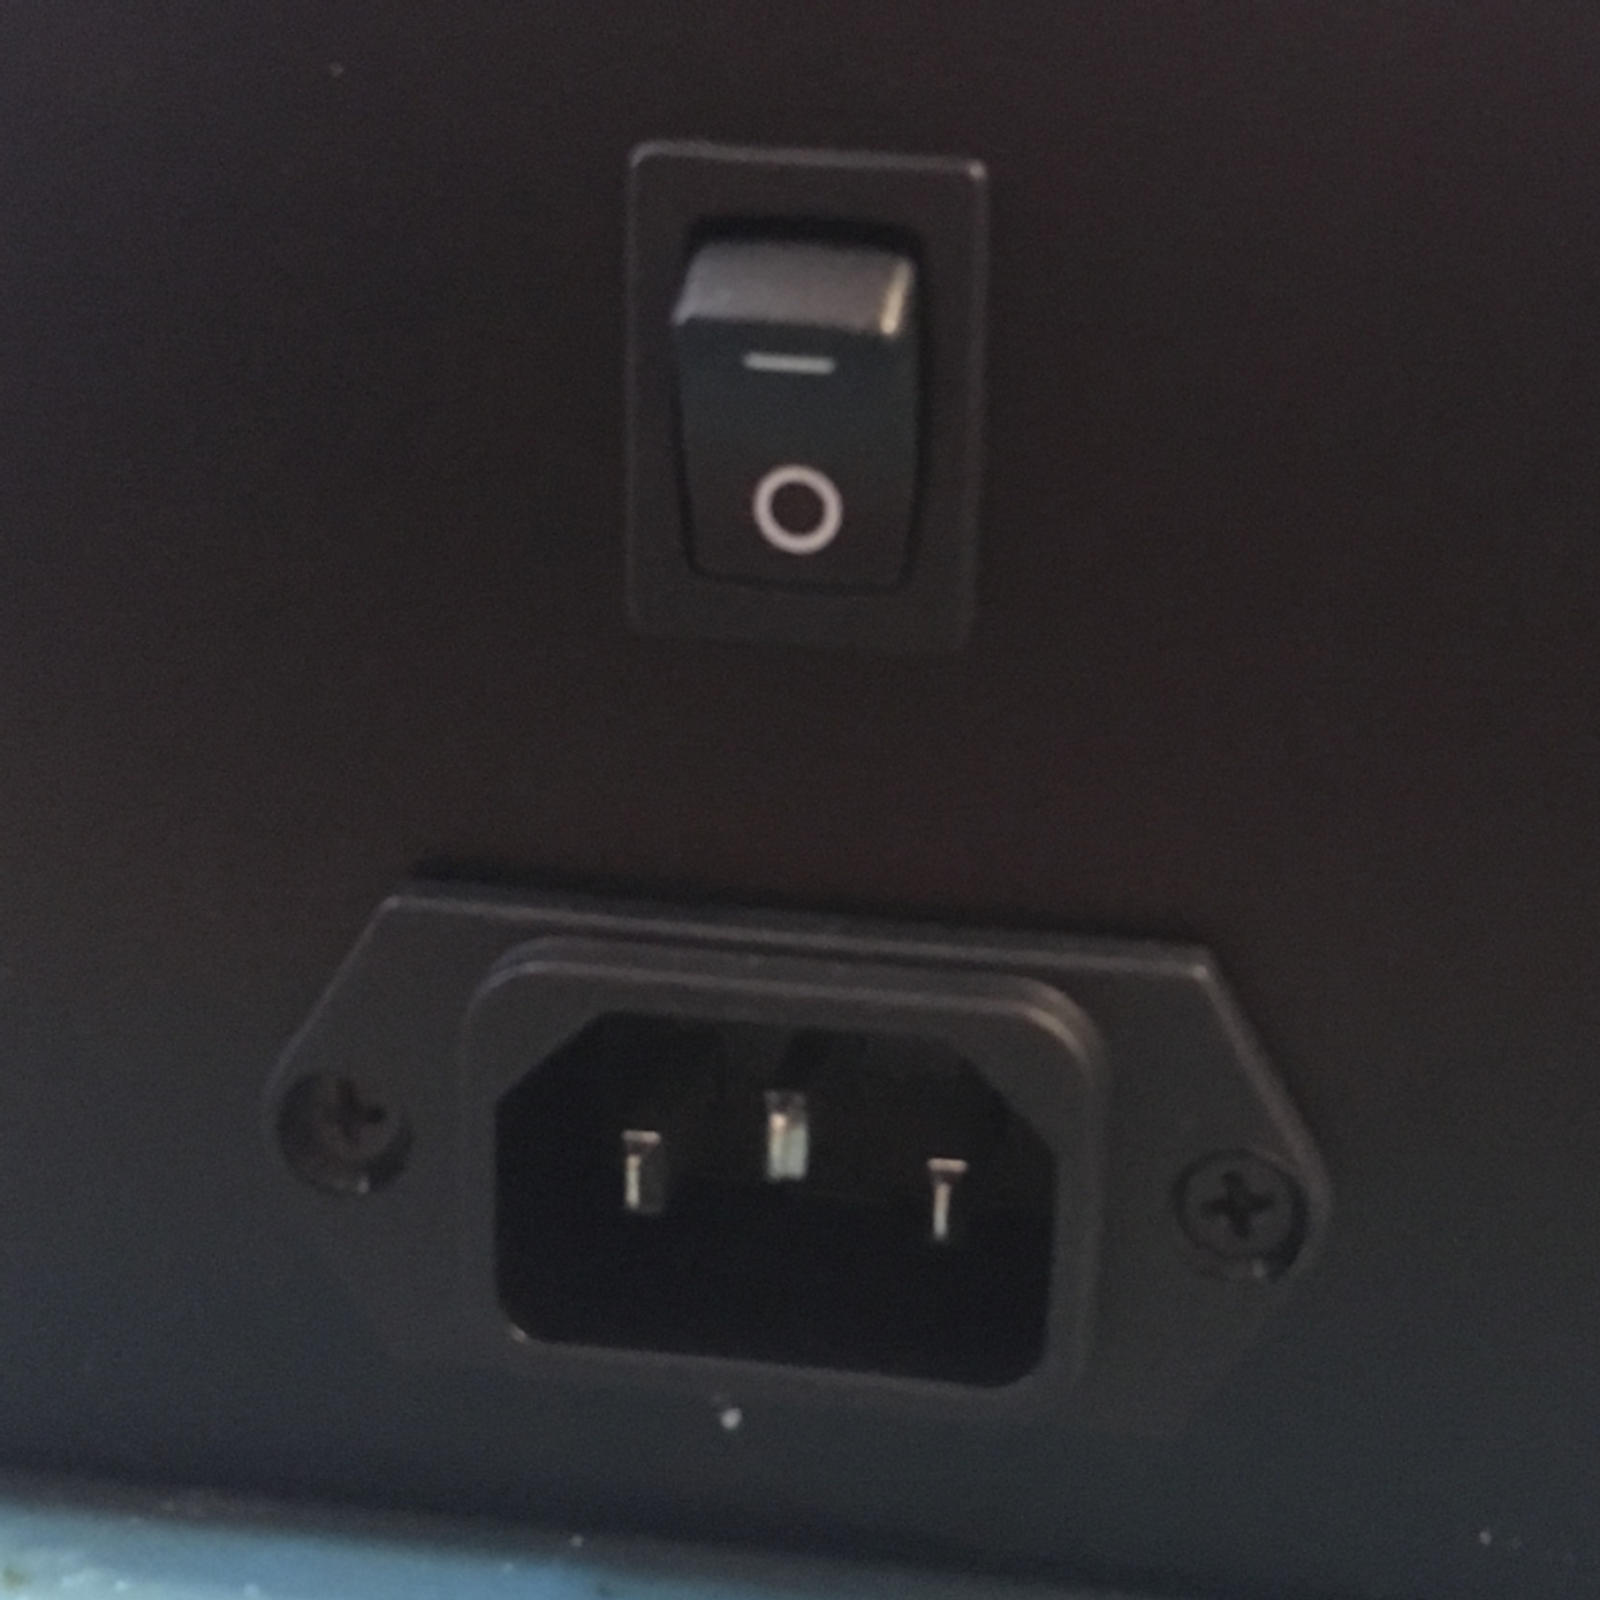 Power connector and switch on back of unit